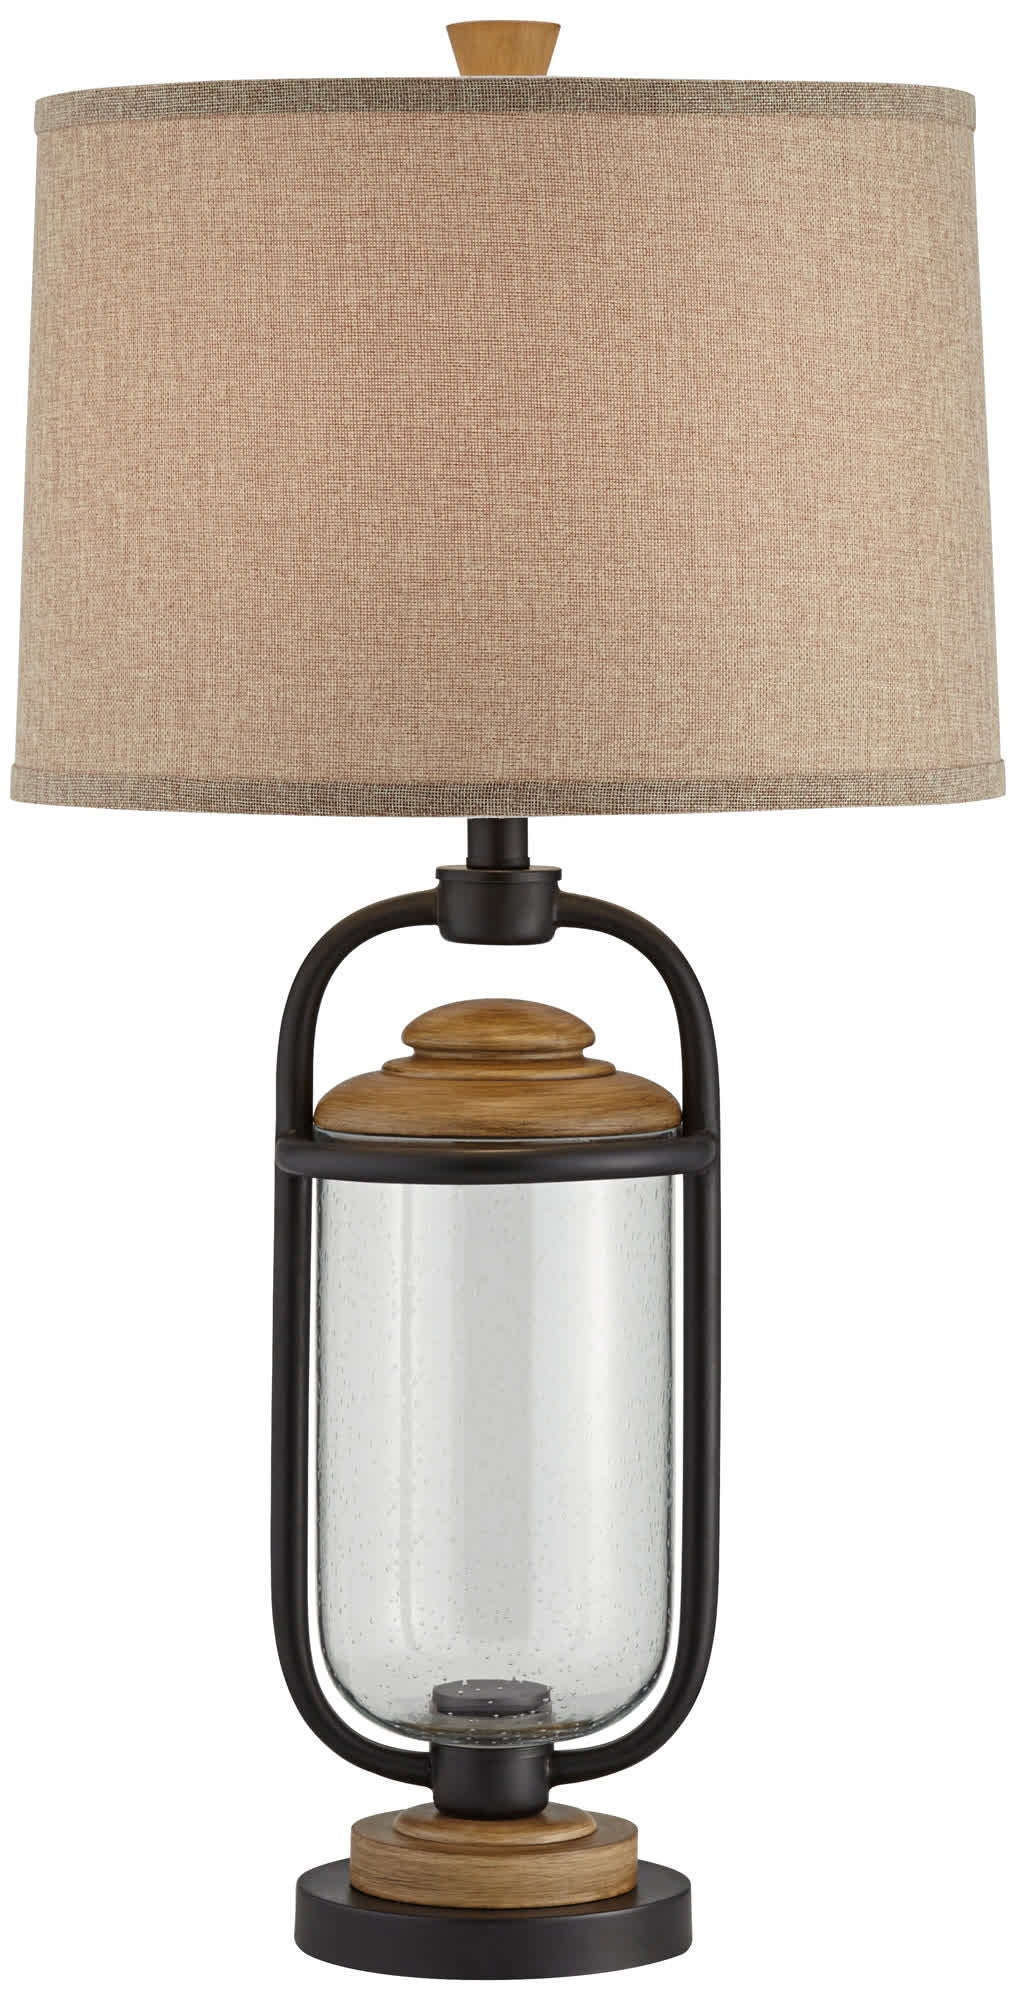 Darby - Table Lamp - Matte Black